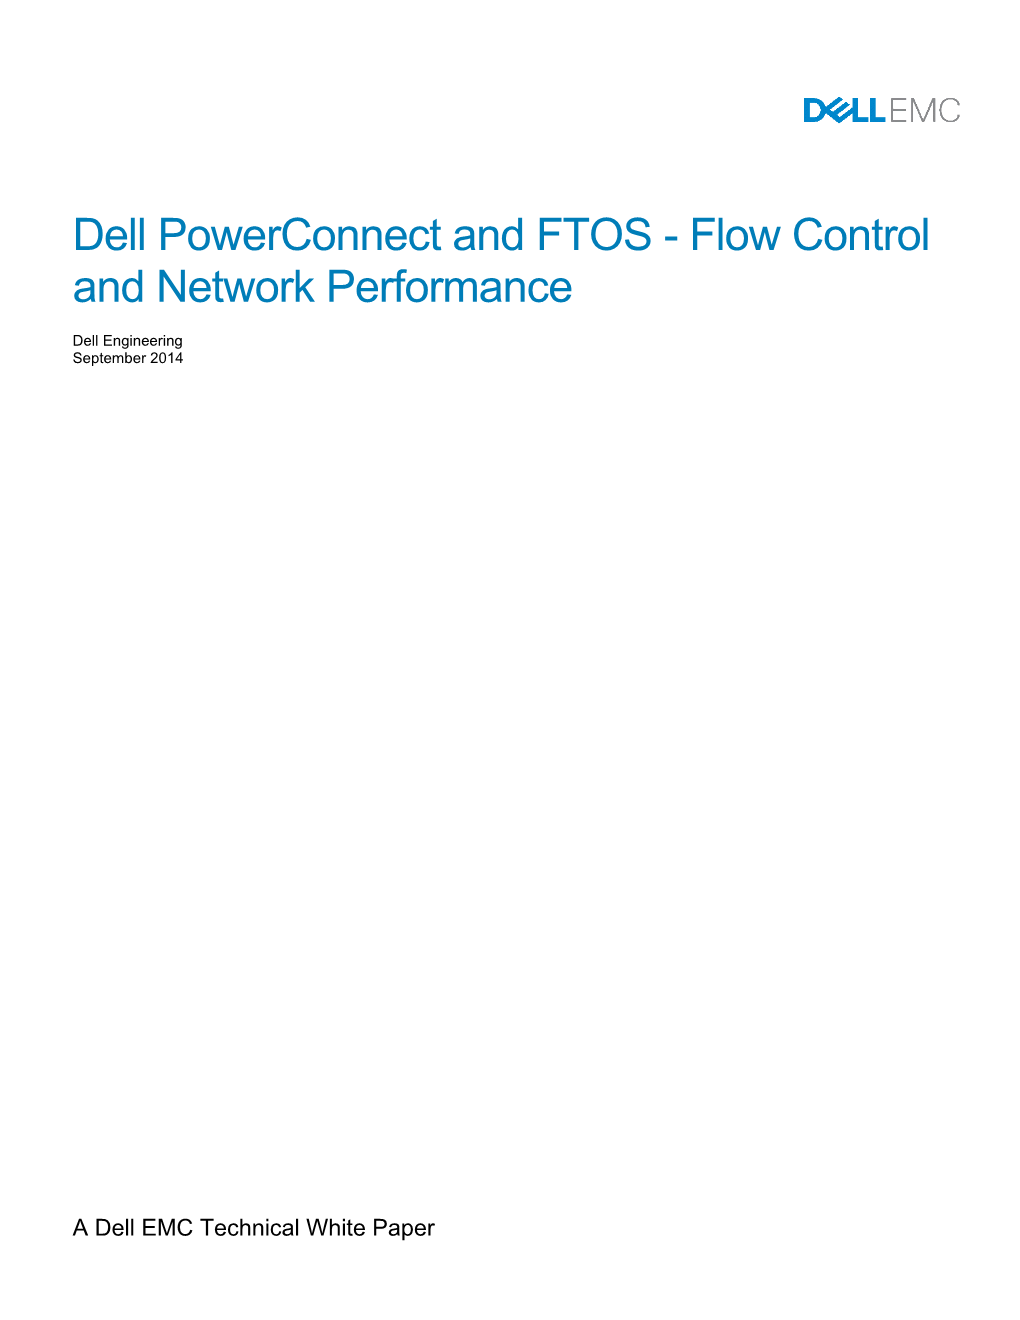 Dell Powerconnect and FTOS - Flow Control and Network Performance